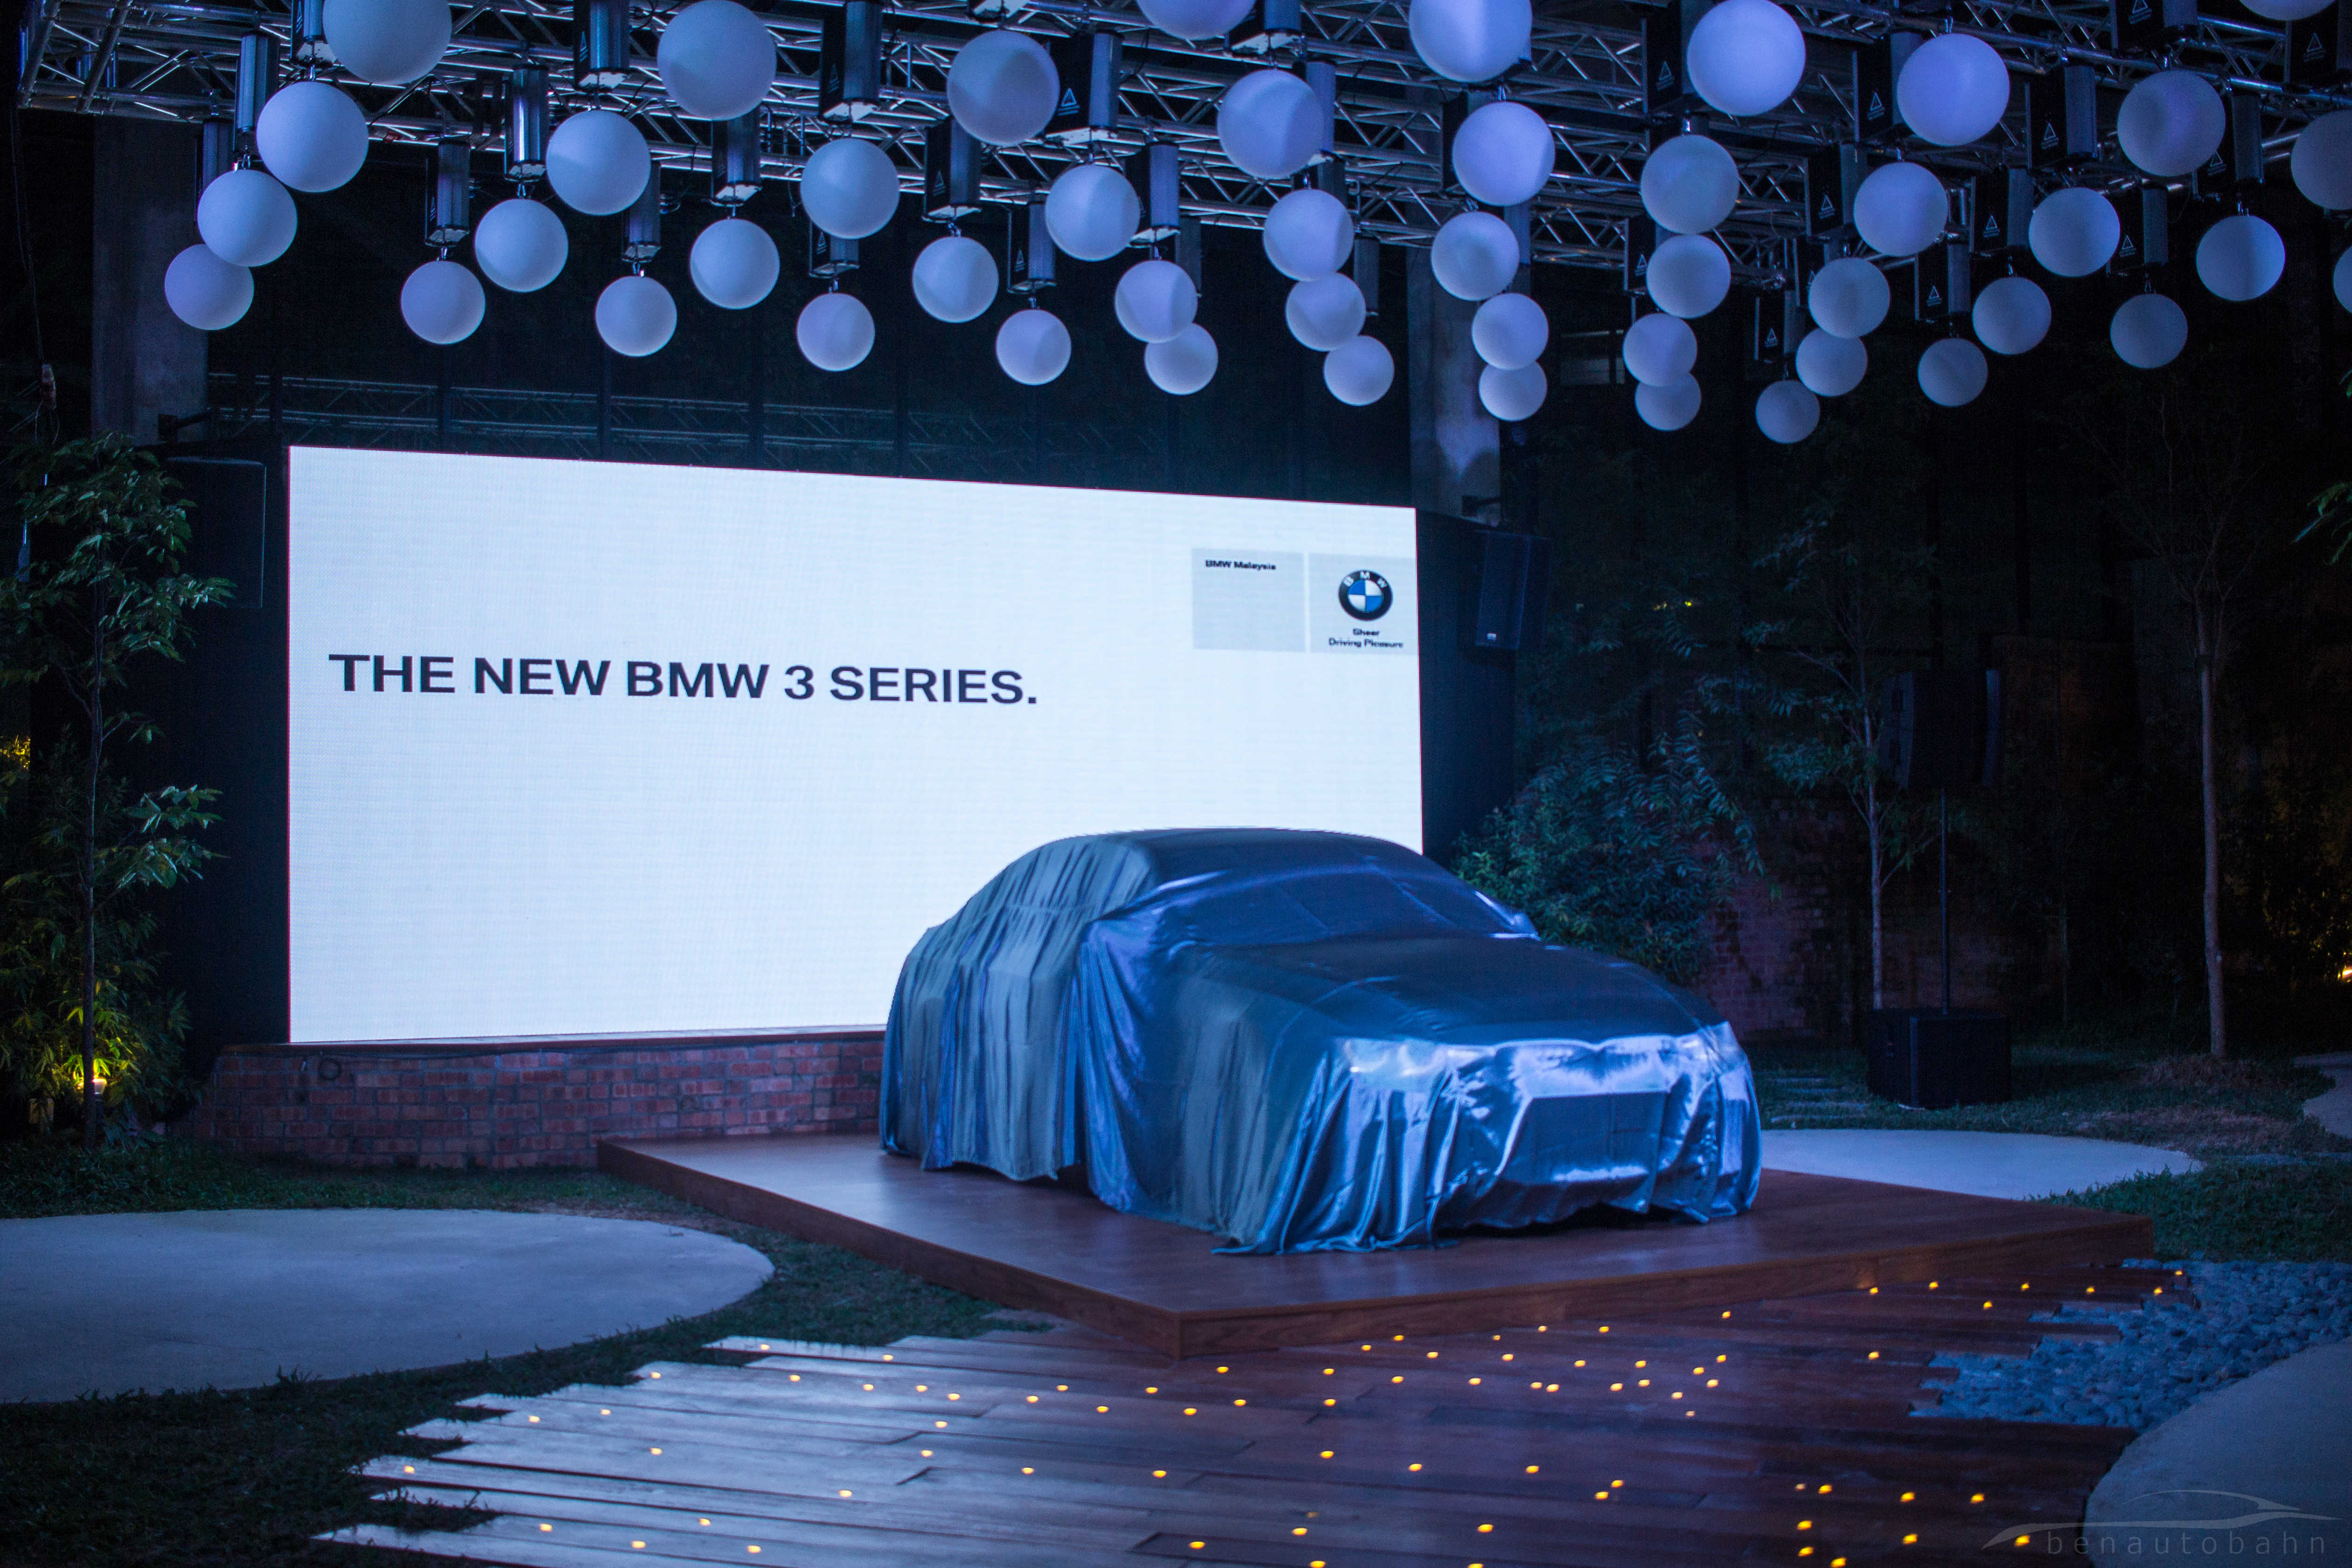 BMW 3 Series facelift launch